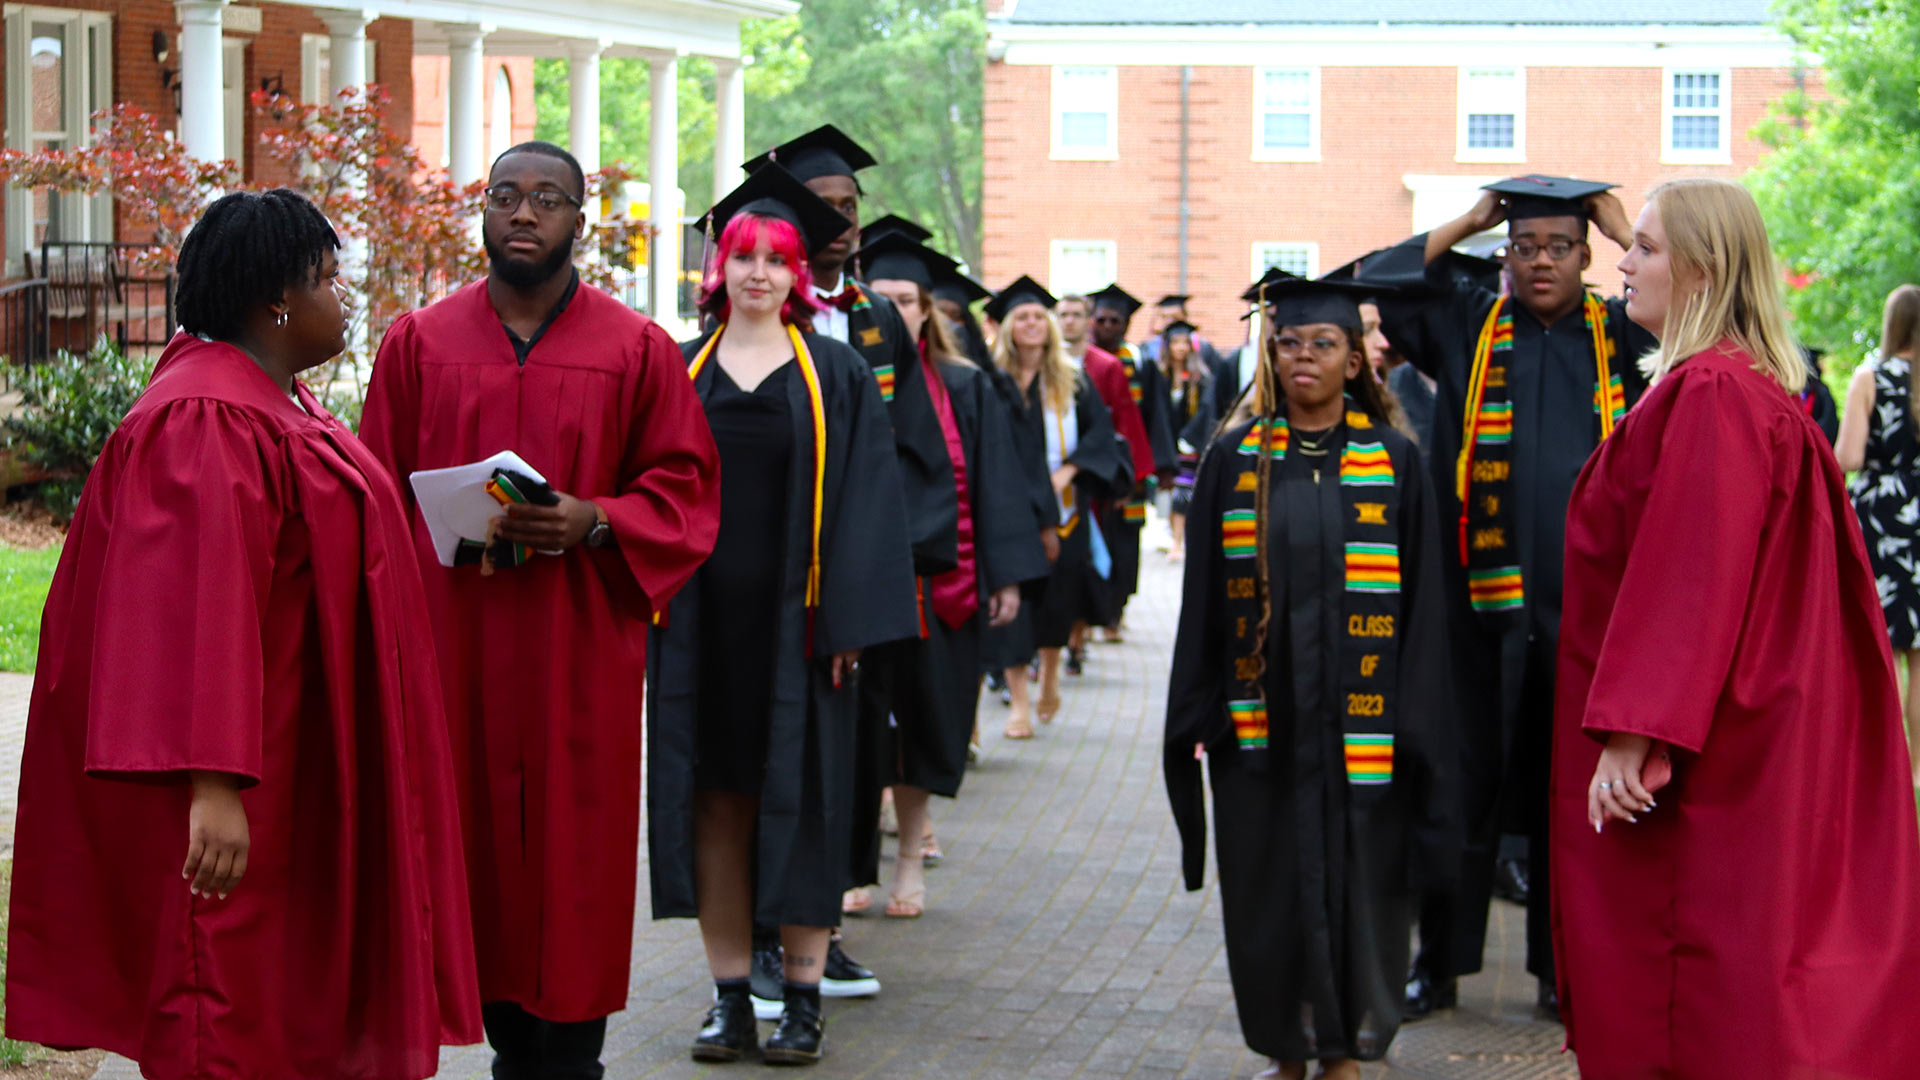 Graduates await faculty in the procession